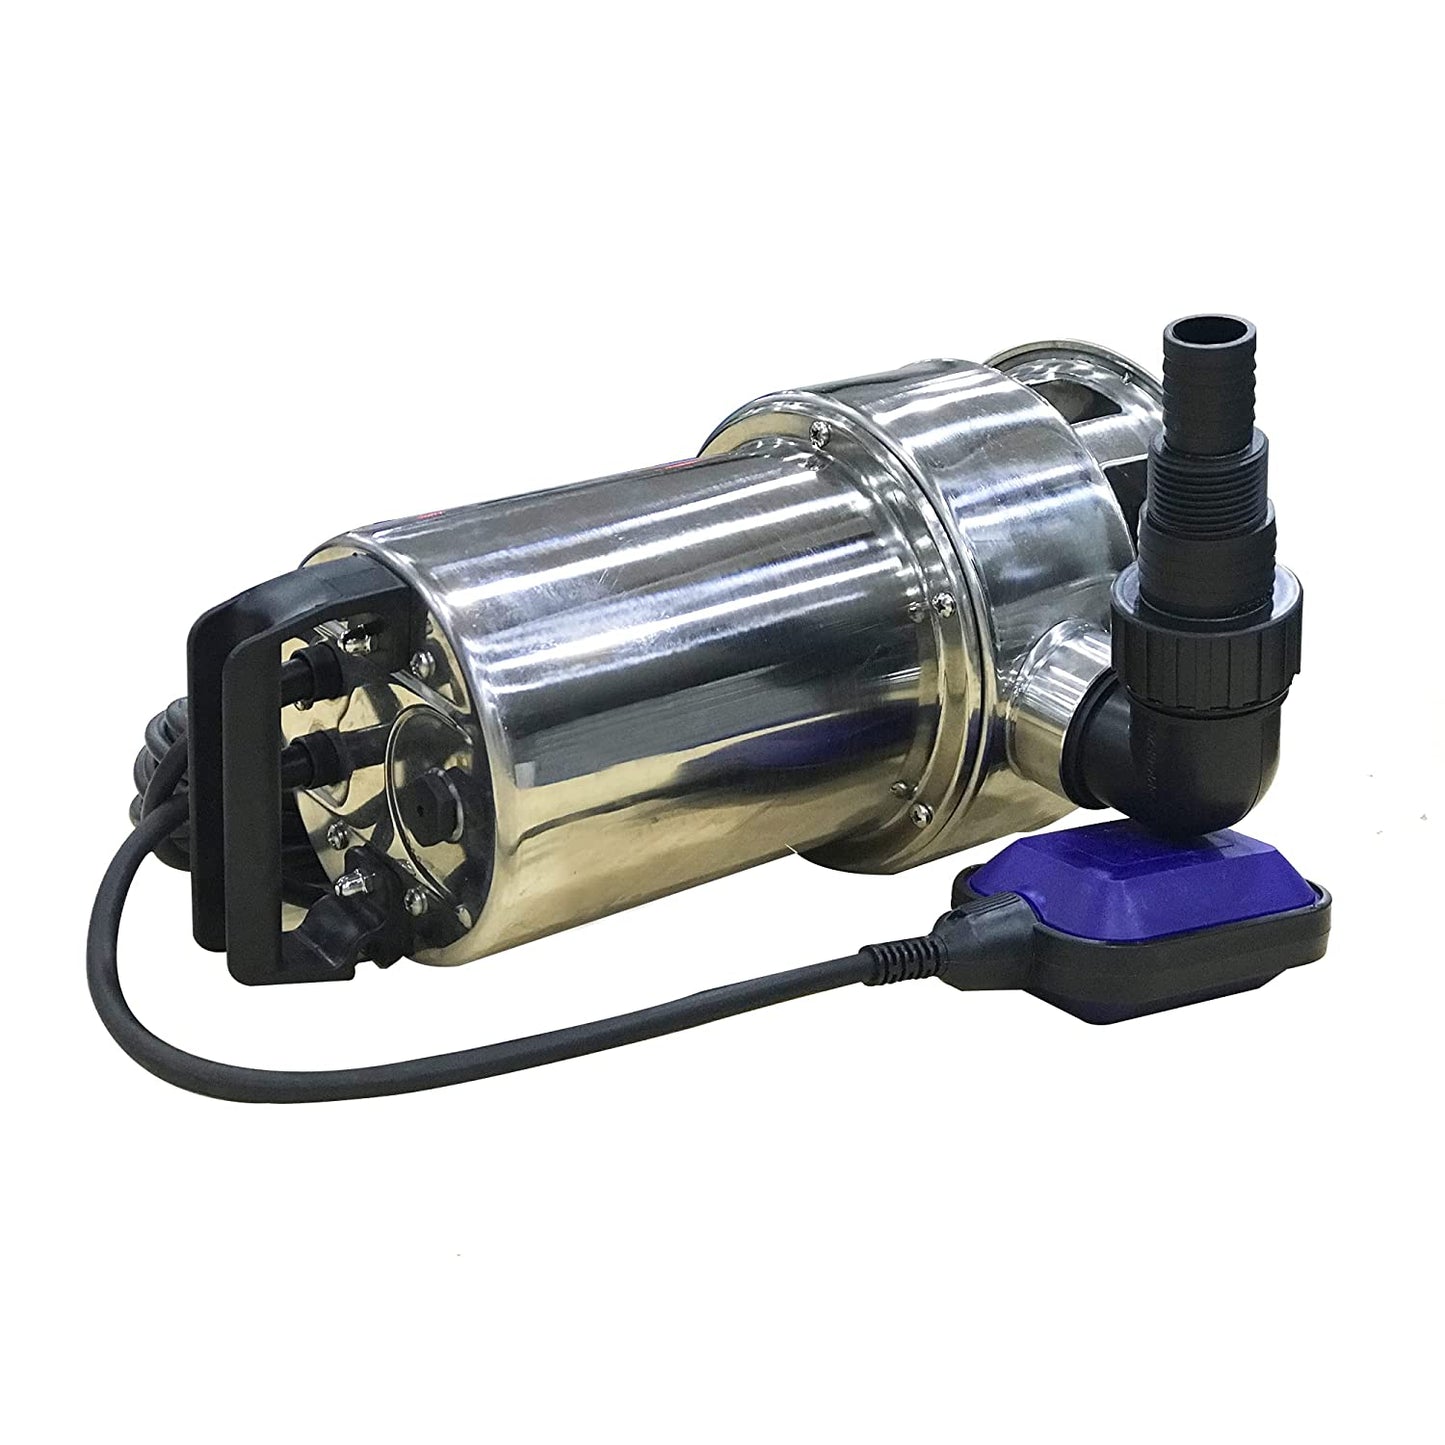 Aegon ASP750-SS - 1HP Single Phase IPX8 Stainless Steel Submersible Sewage Pump with Float Switch (750W, 13500 L/H, Head 9.5mtr, Depth 7m)